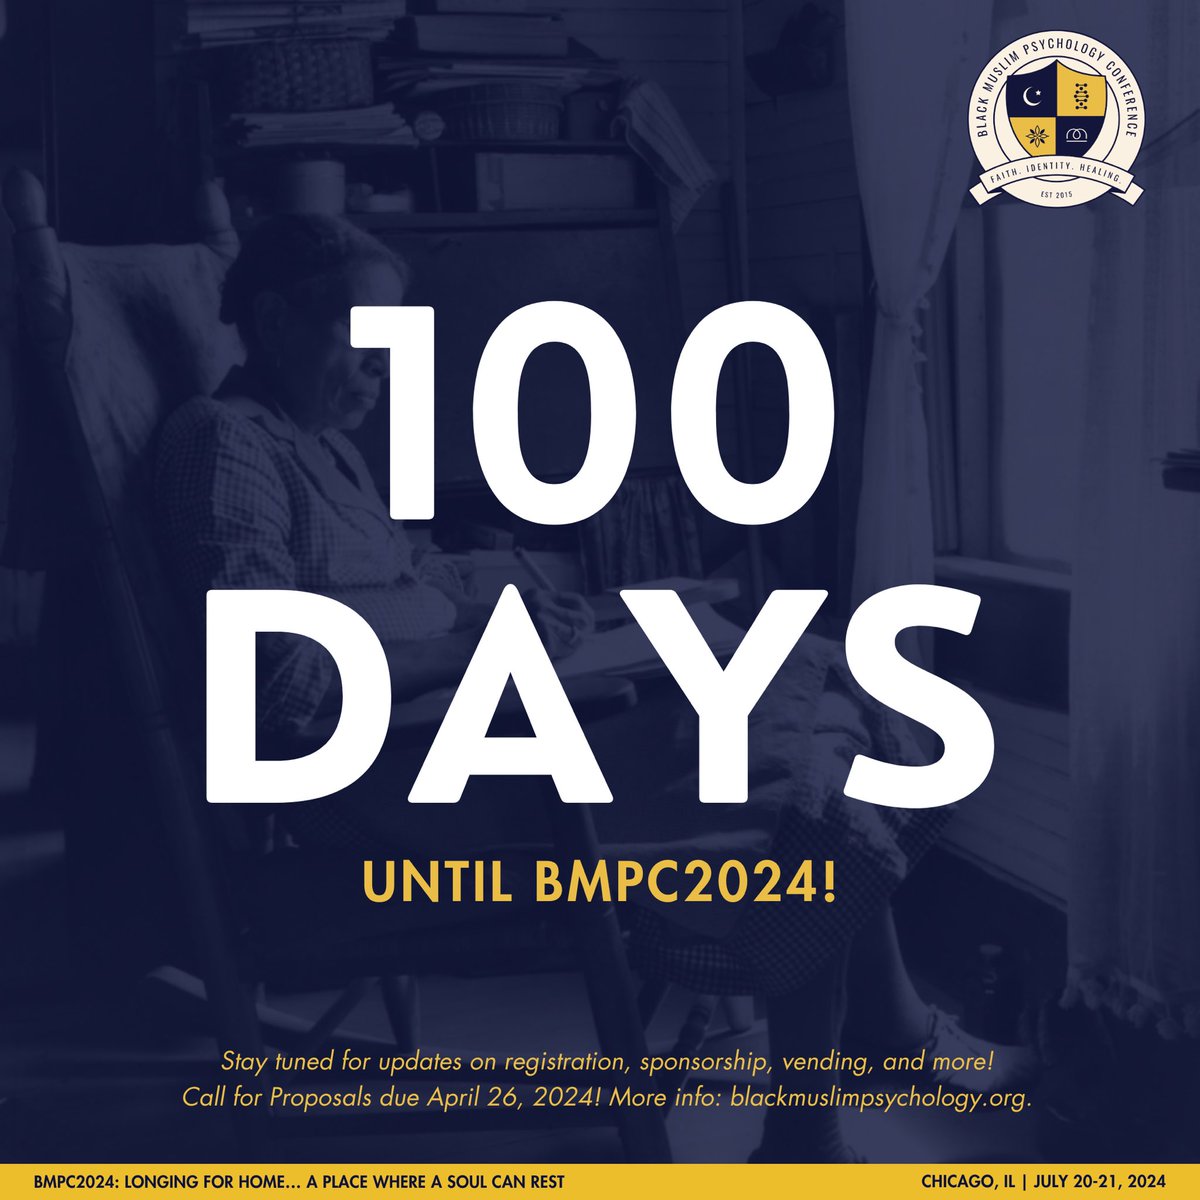 Eid Mubarak Folks!
Can you believe #BMPC2024 is in just 100 DAYS?!?!🫣 We’re so excited to welcome Warsan Shire & @HAbdullah39 as our keynote speakers! We’re also looking forward to the many wonderful scholars, activists + artists who will facilitate thought-provoking convos!